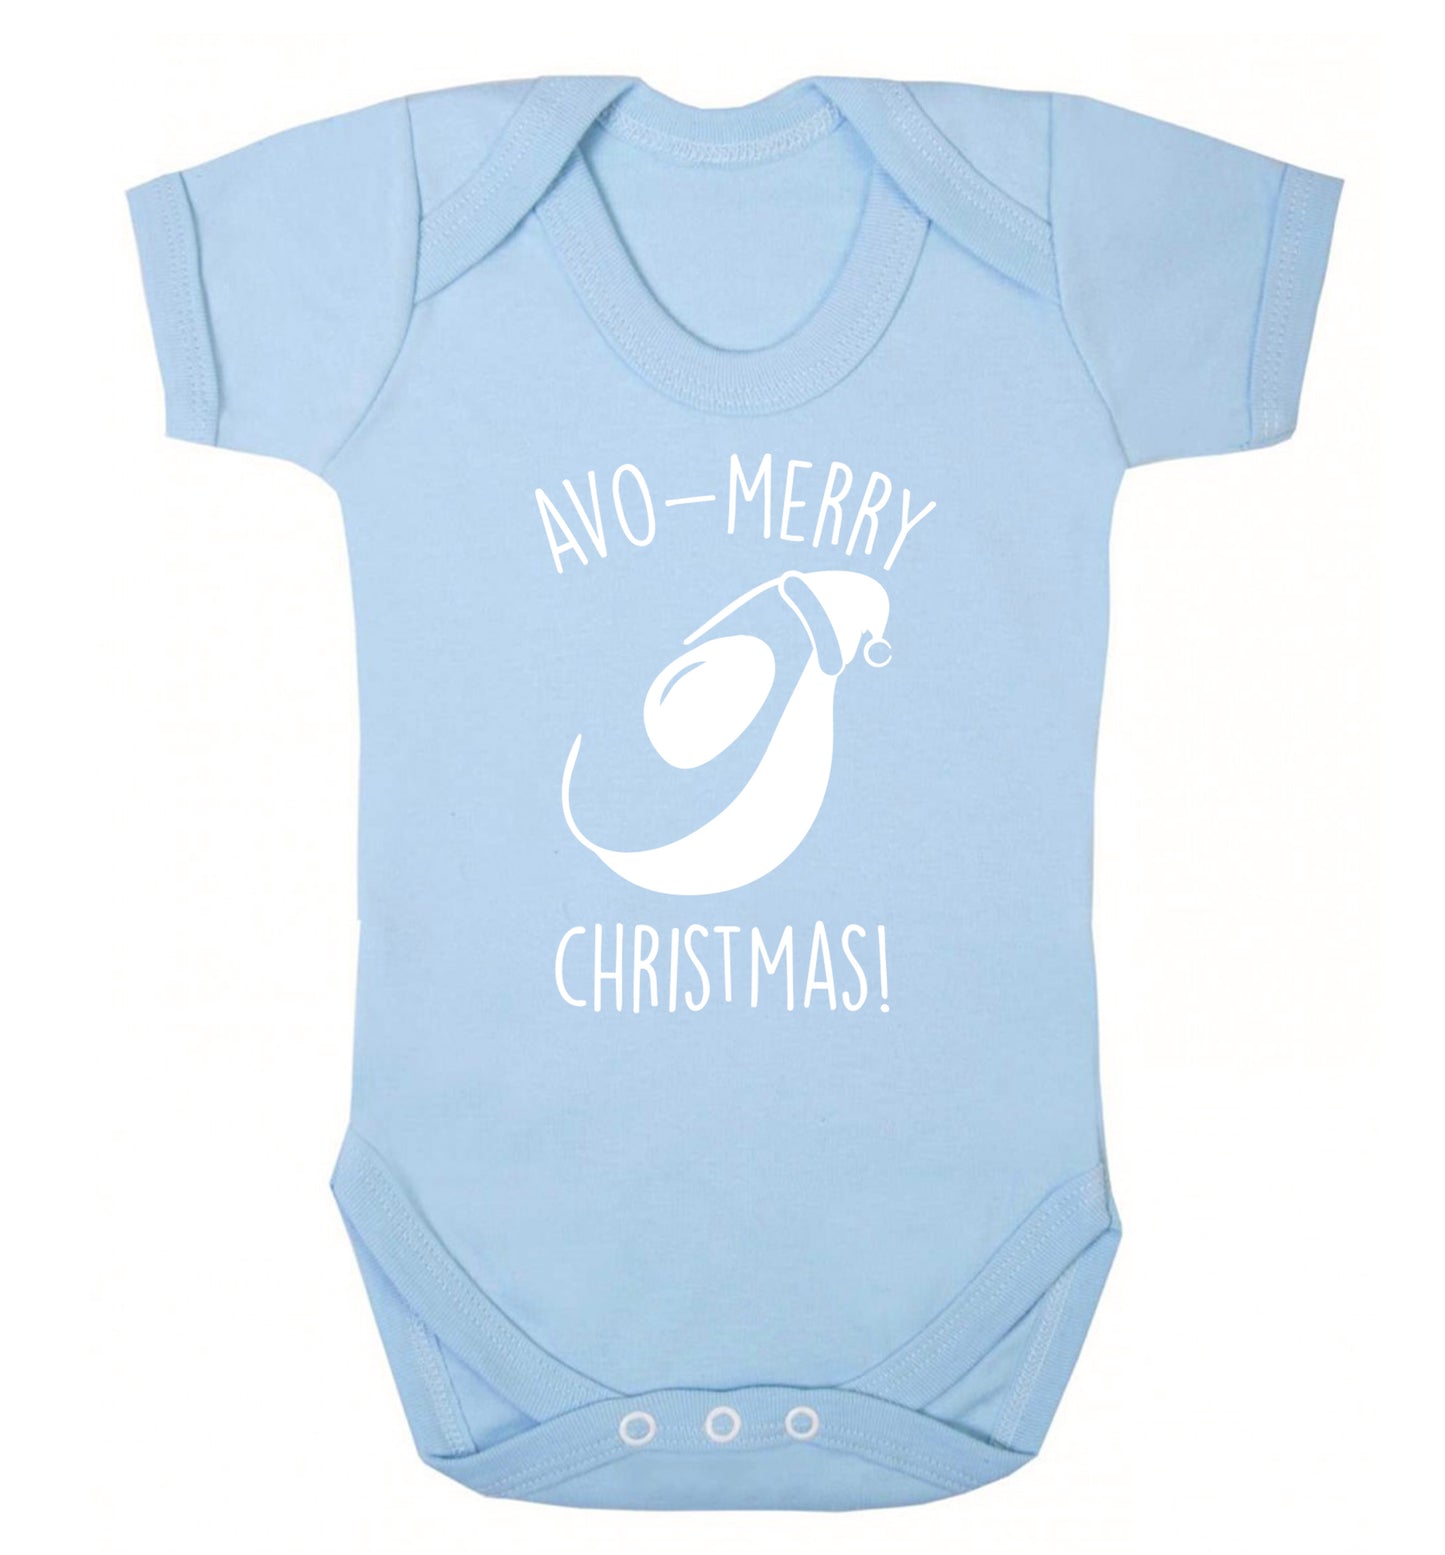 Avo-Merry Christmas Baby Vest pale blue 18-24 months